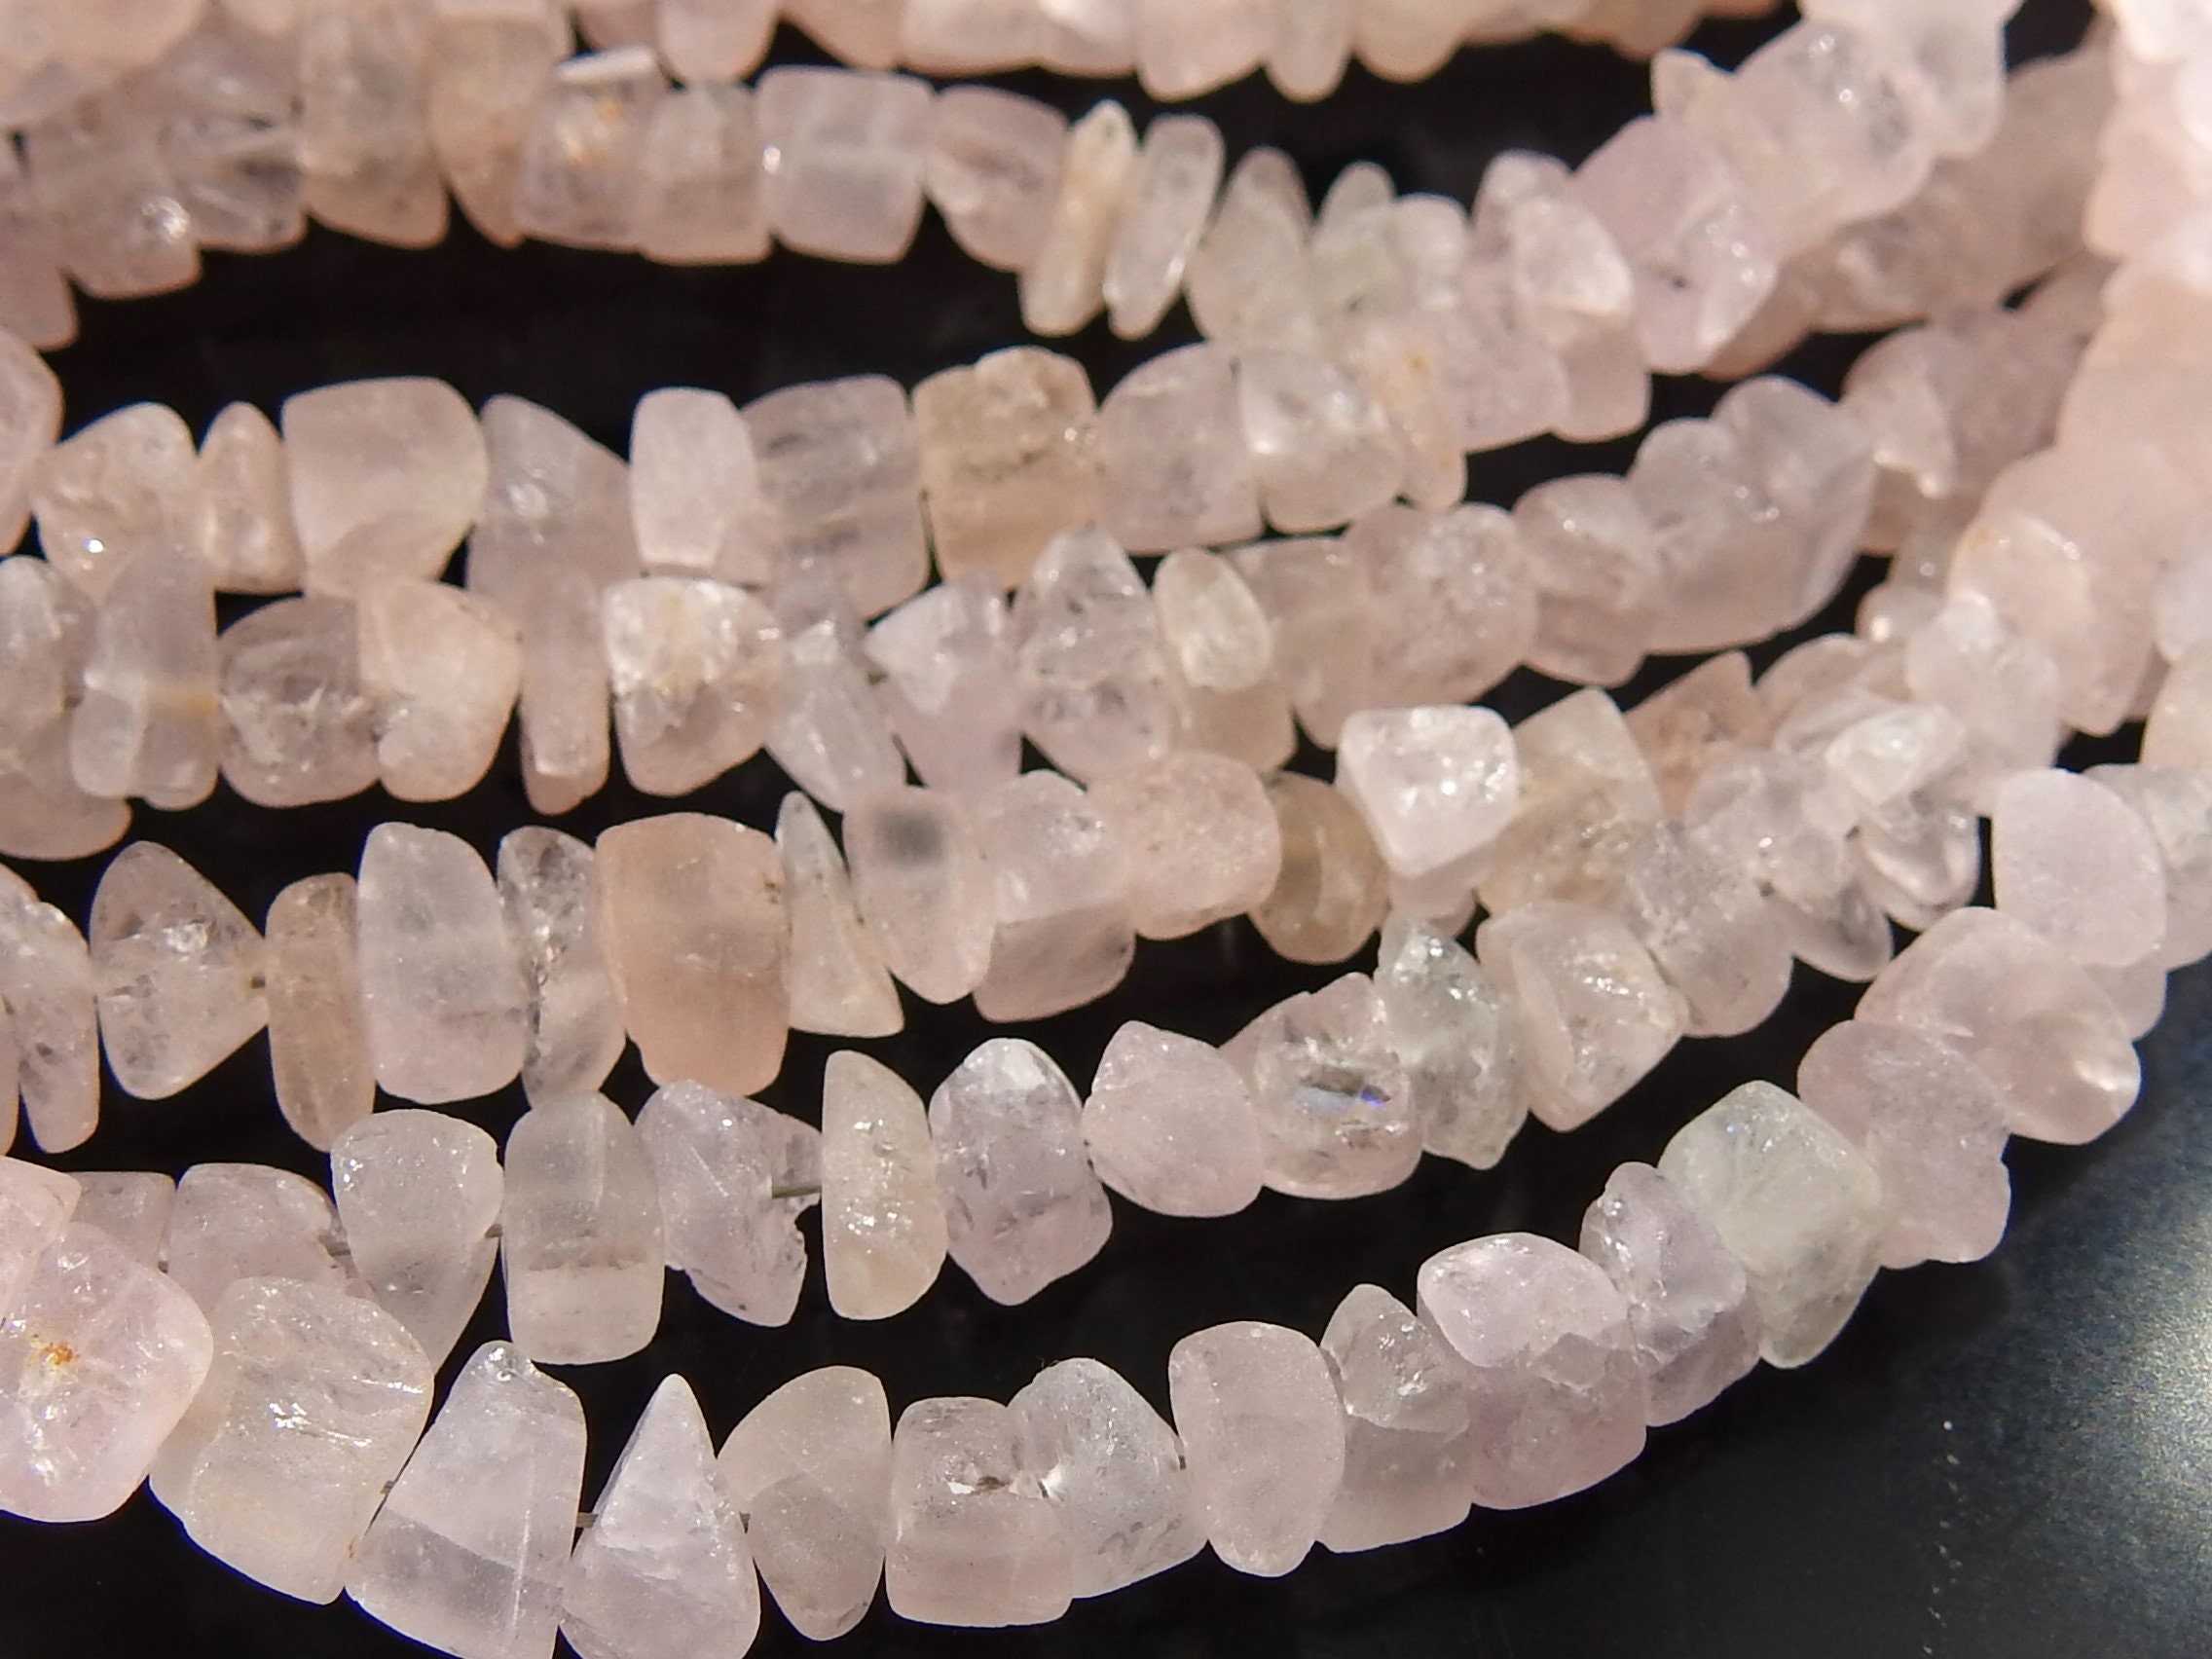 Morganite Rough Bead,Uncut,Anklet,Chip,Nugget,Loose Raw,Minerals Stone,Aquamarine,Wholesaler,Supplies 16Inch 5X6MM Approx 100%Natural PMERB1 | Save 33% - Rajasthan Living 15